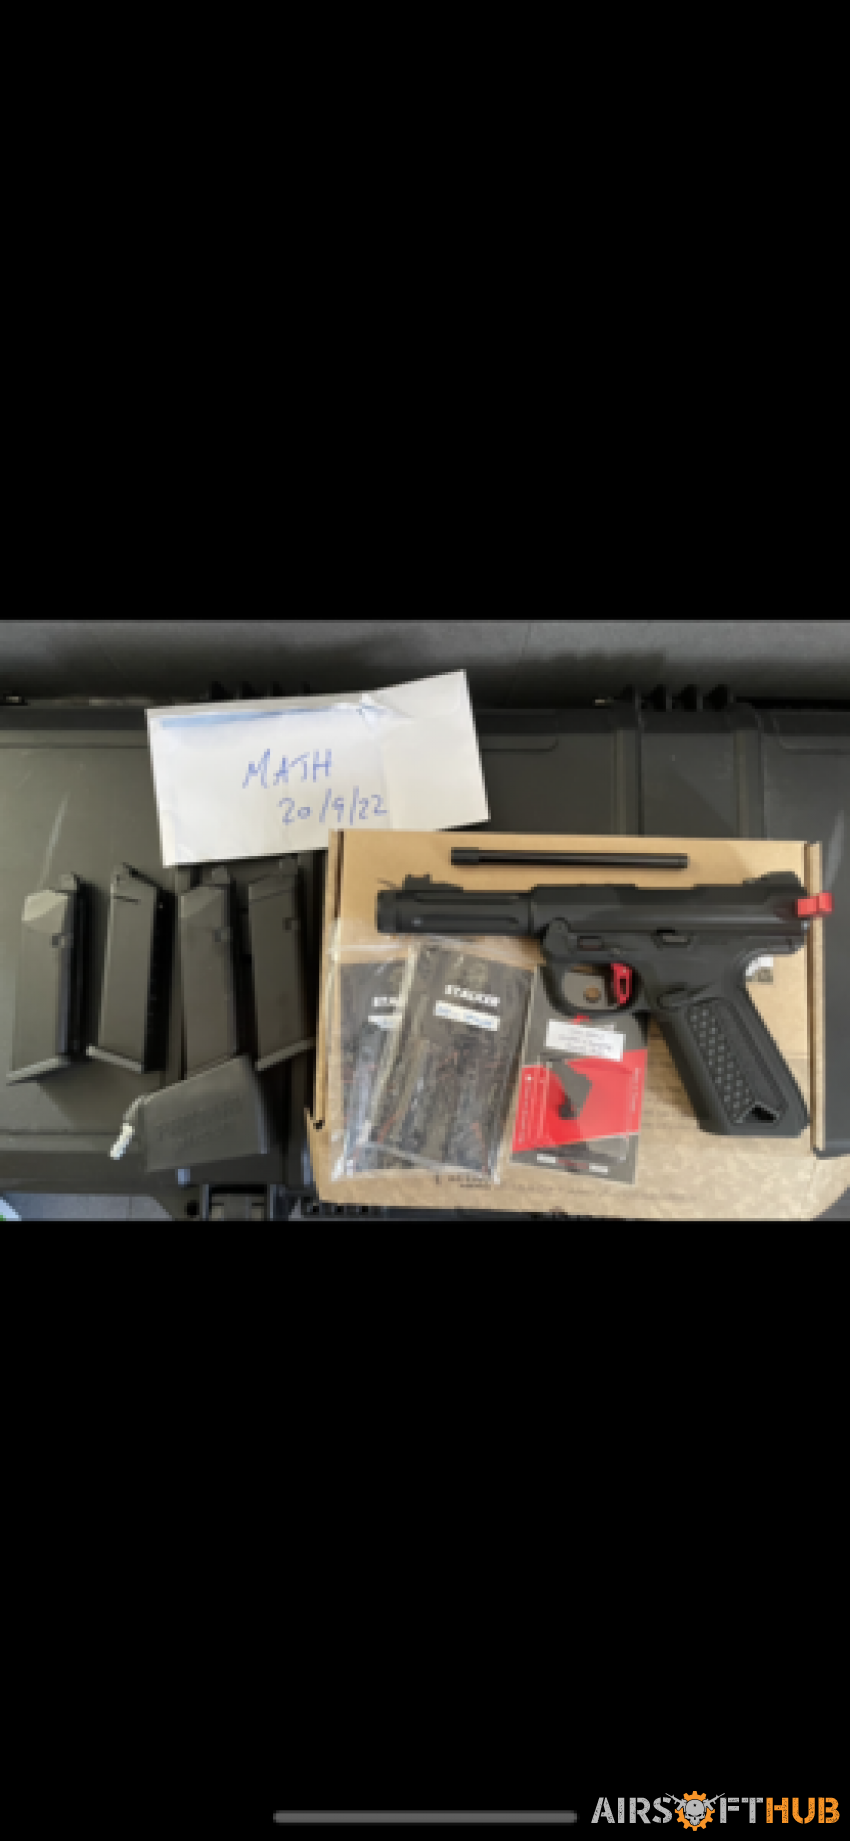 Aap-01 bundle - Used airsoft equipment